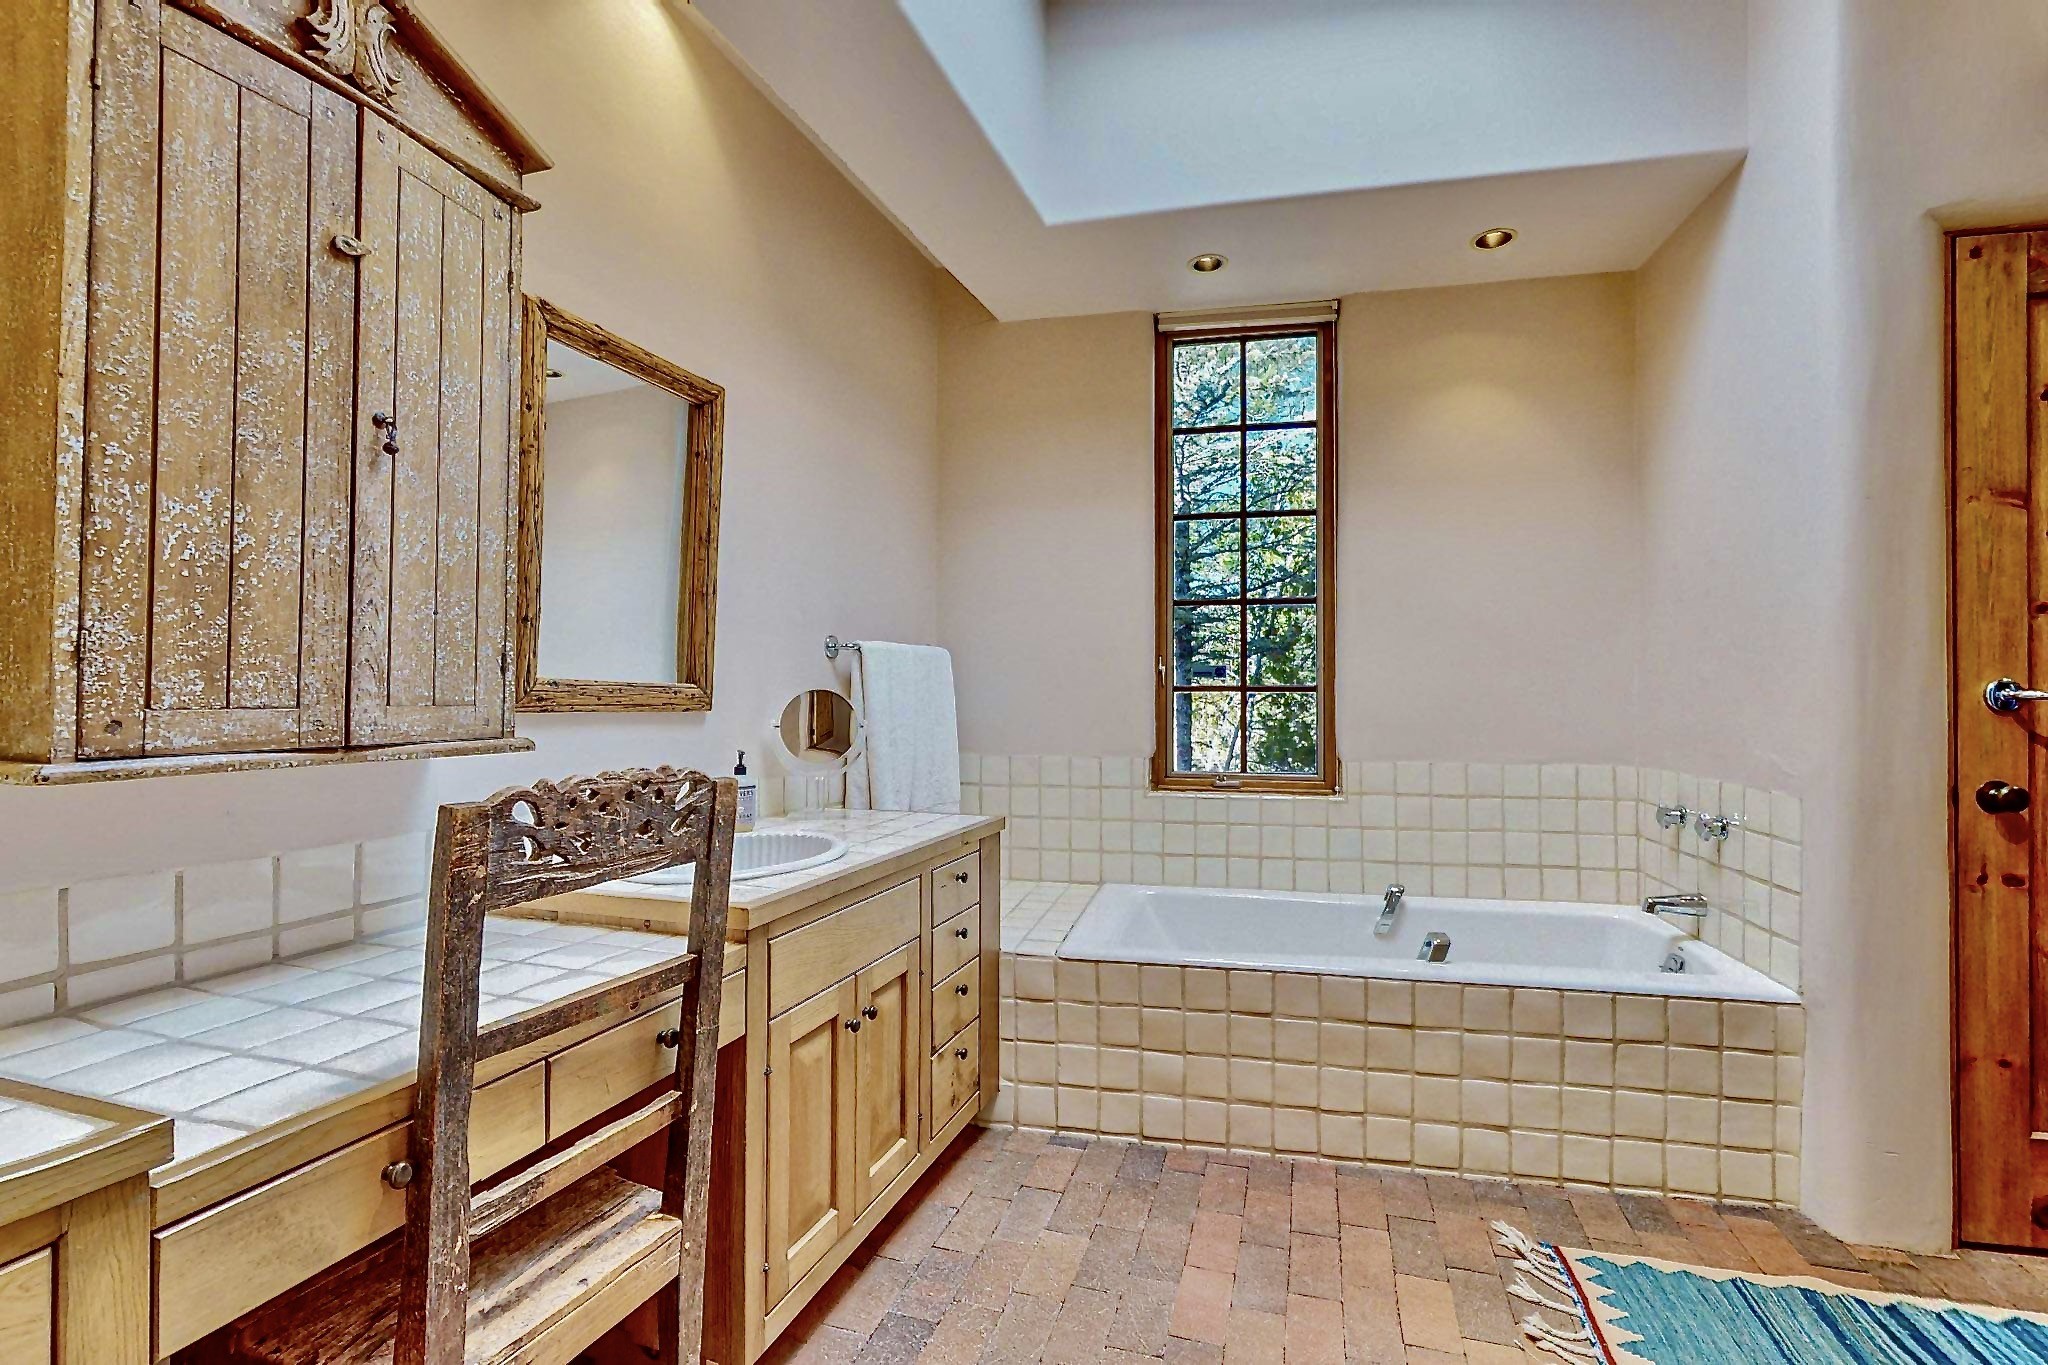 2201 Wilderness Cove, Santa Fe, New Mexico 87505, 4 Bedrooms Bedrooms, ,4 BathroomsBathrooms,Residential,For Sale,2201 Wilderness Cove,202400345